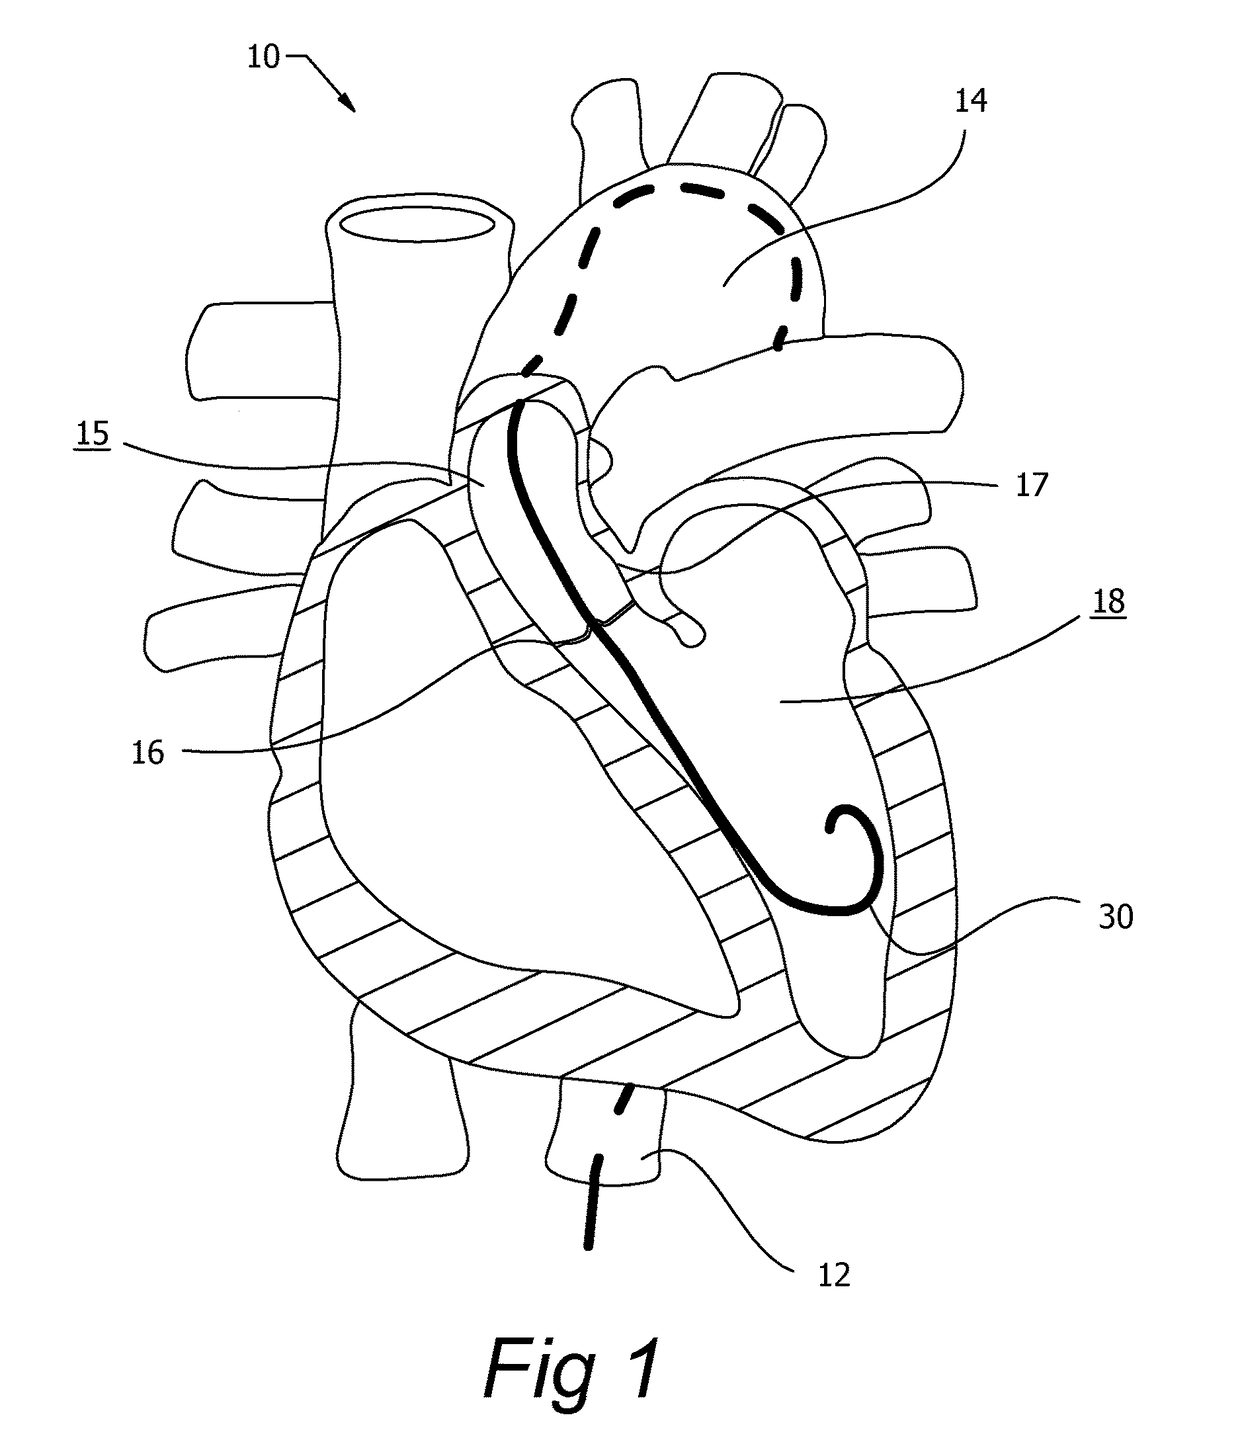 Integrated catheter guide wire control device